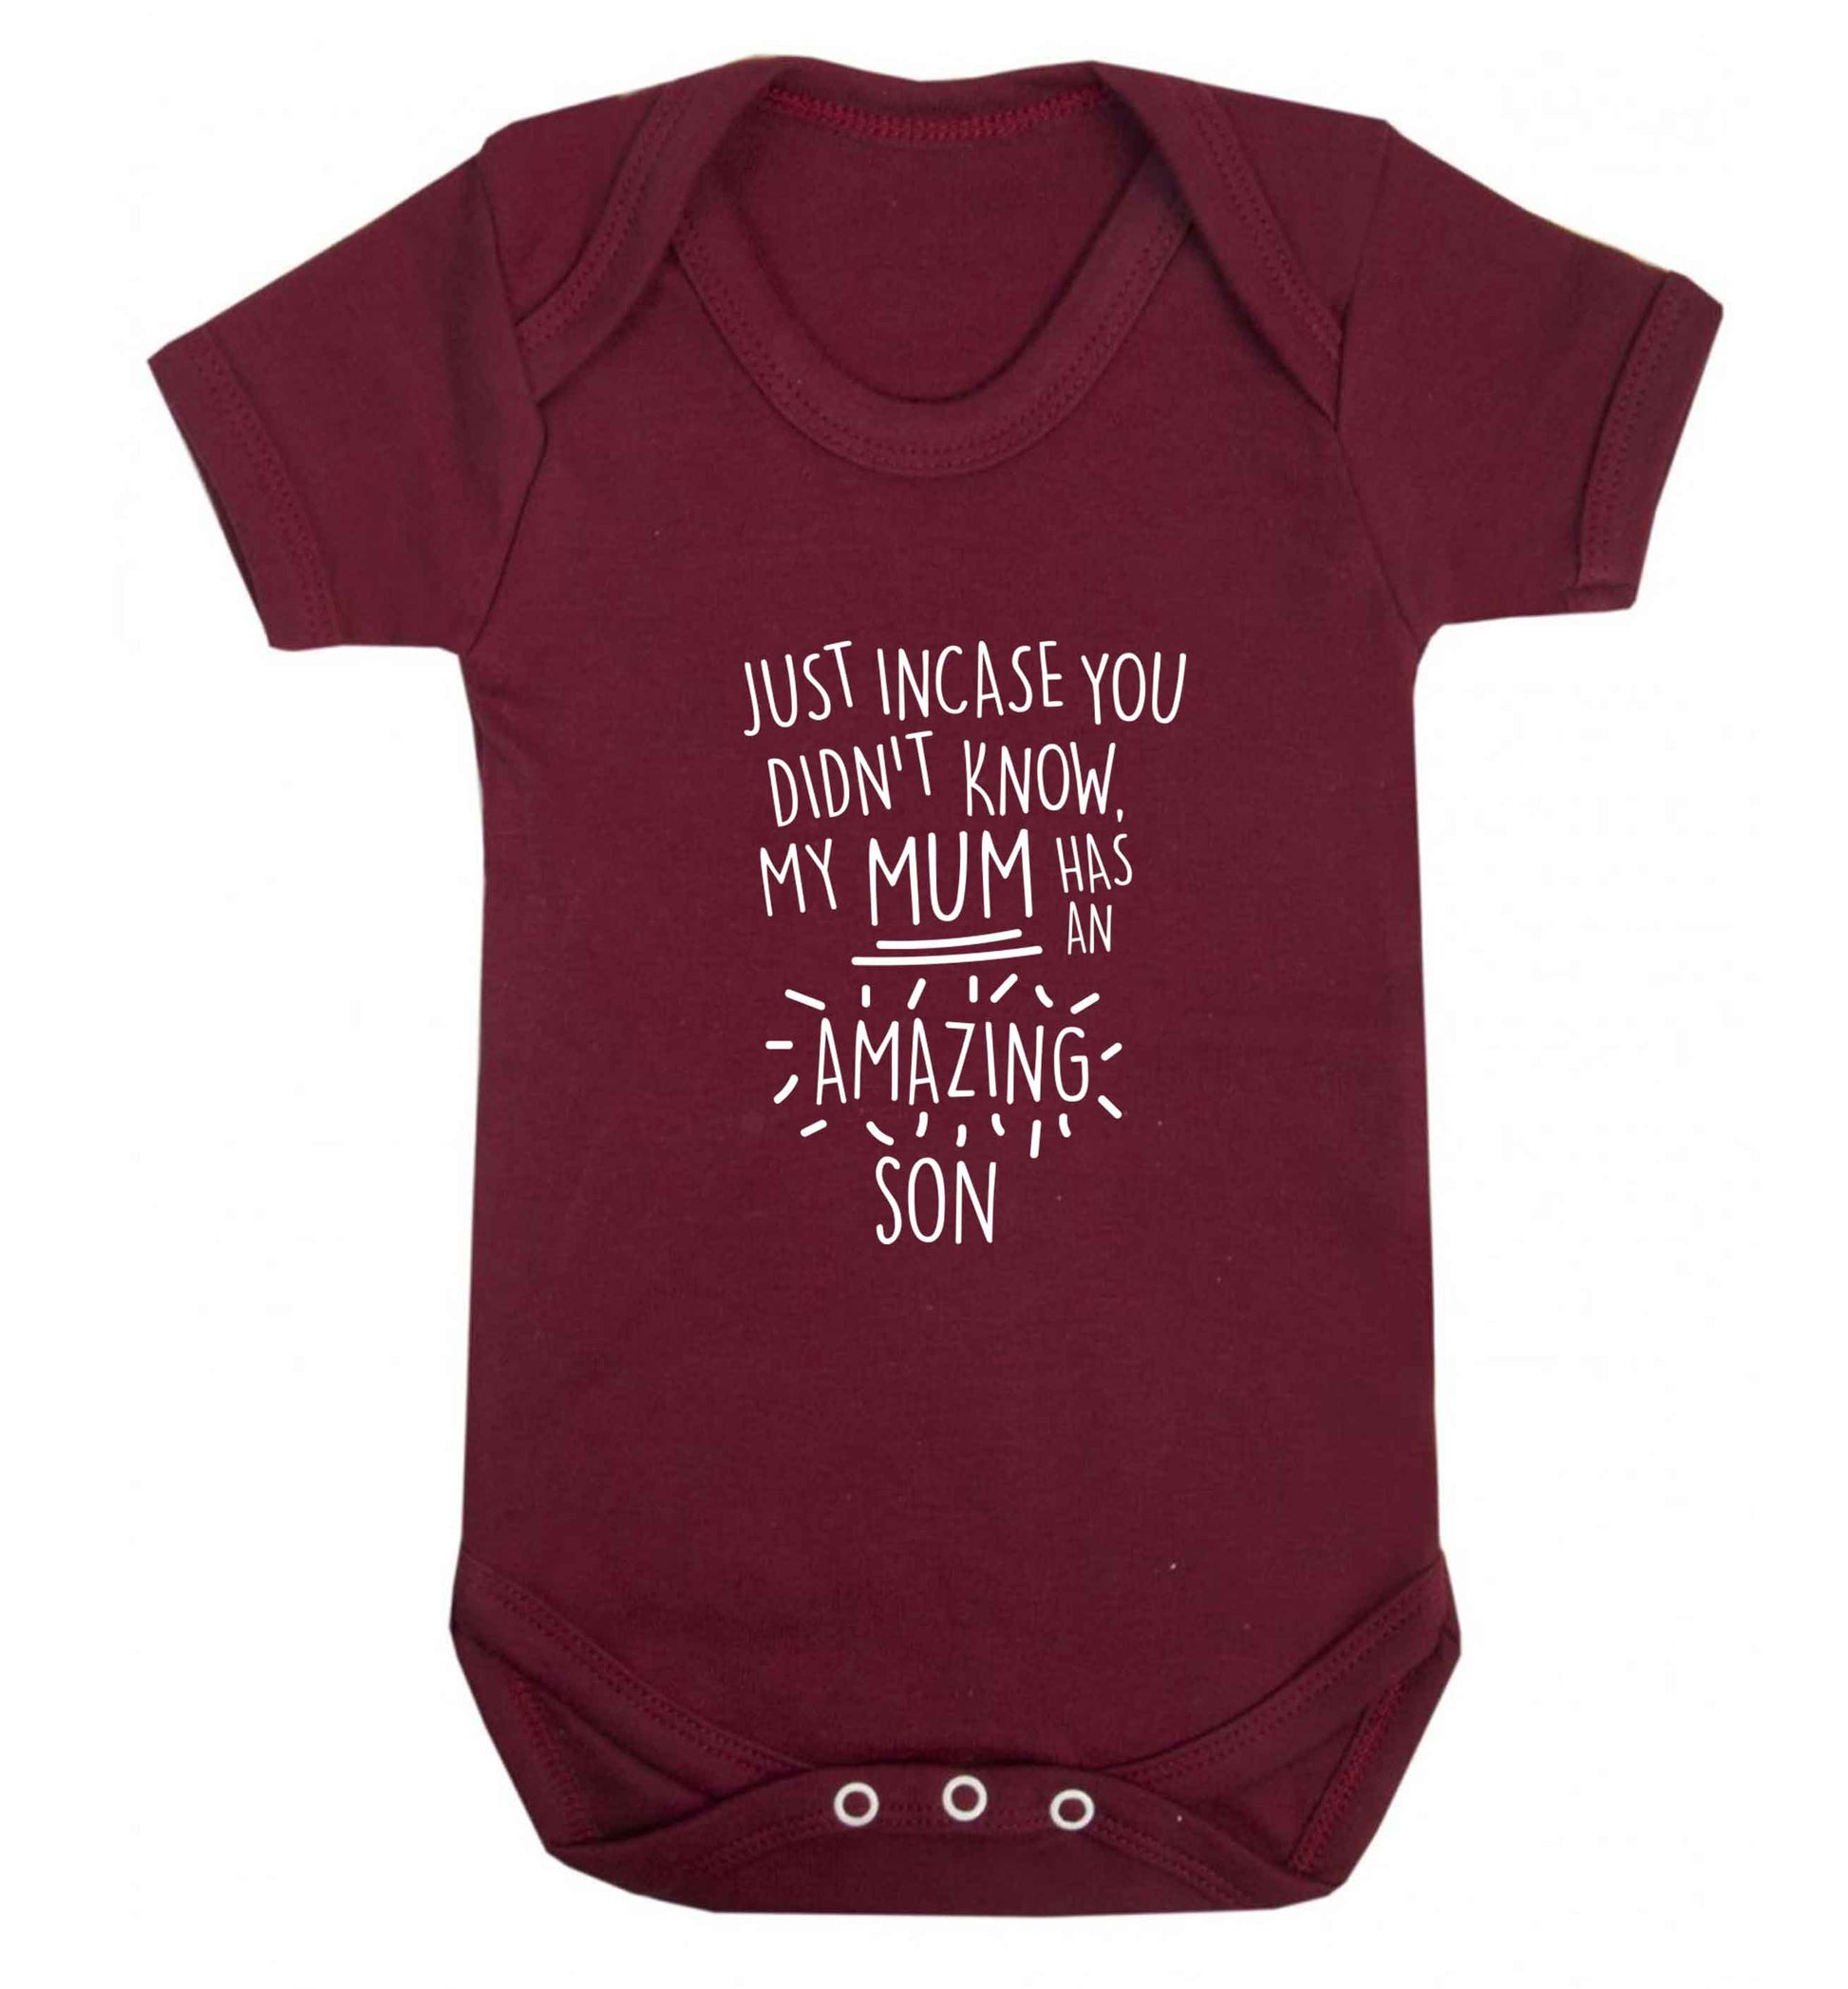 Just incase you didn't know my mum has an amazing son baby vest maroon 18-24 months